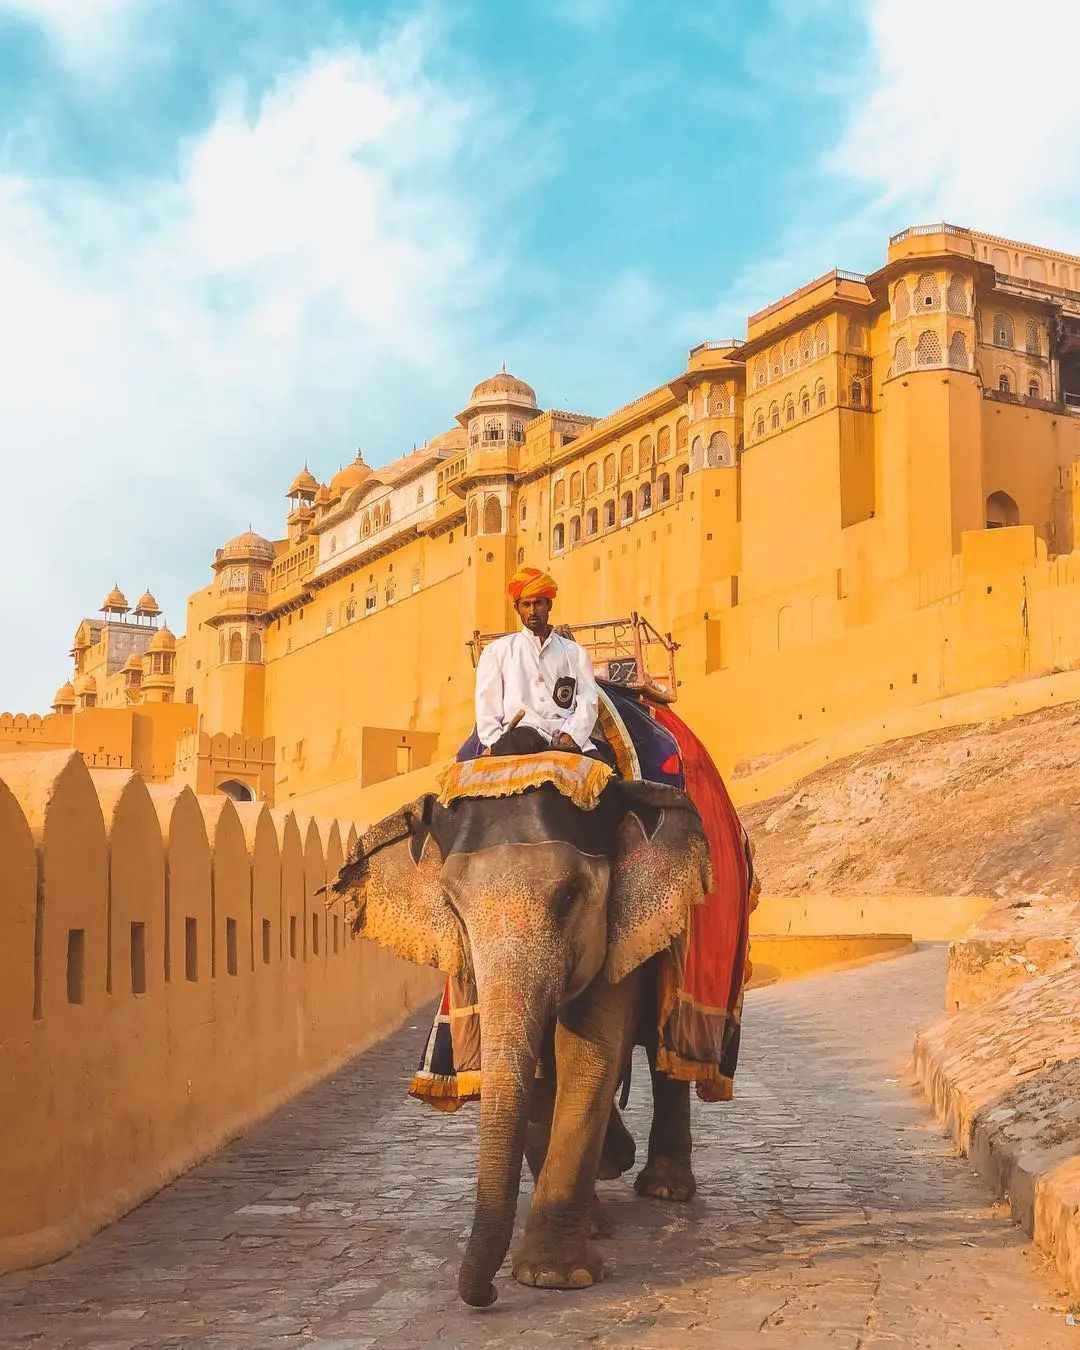 Very beautiful pictures of Amer Fort will win your heart